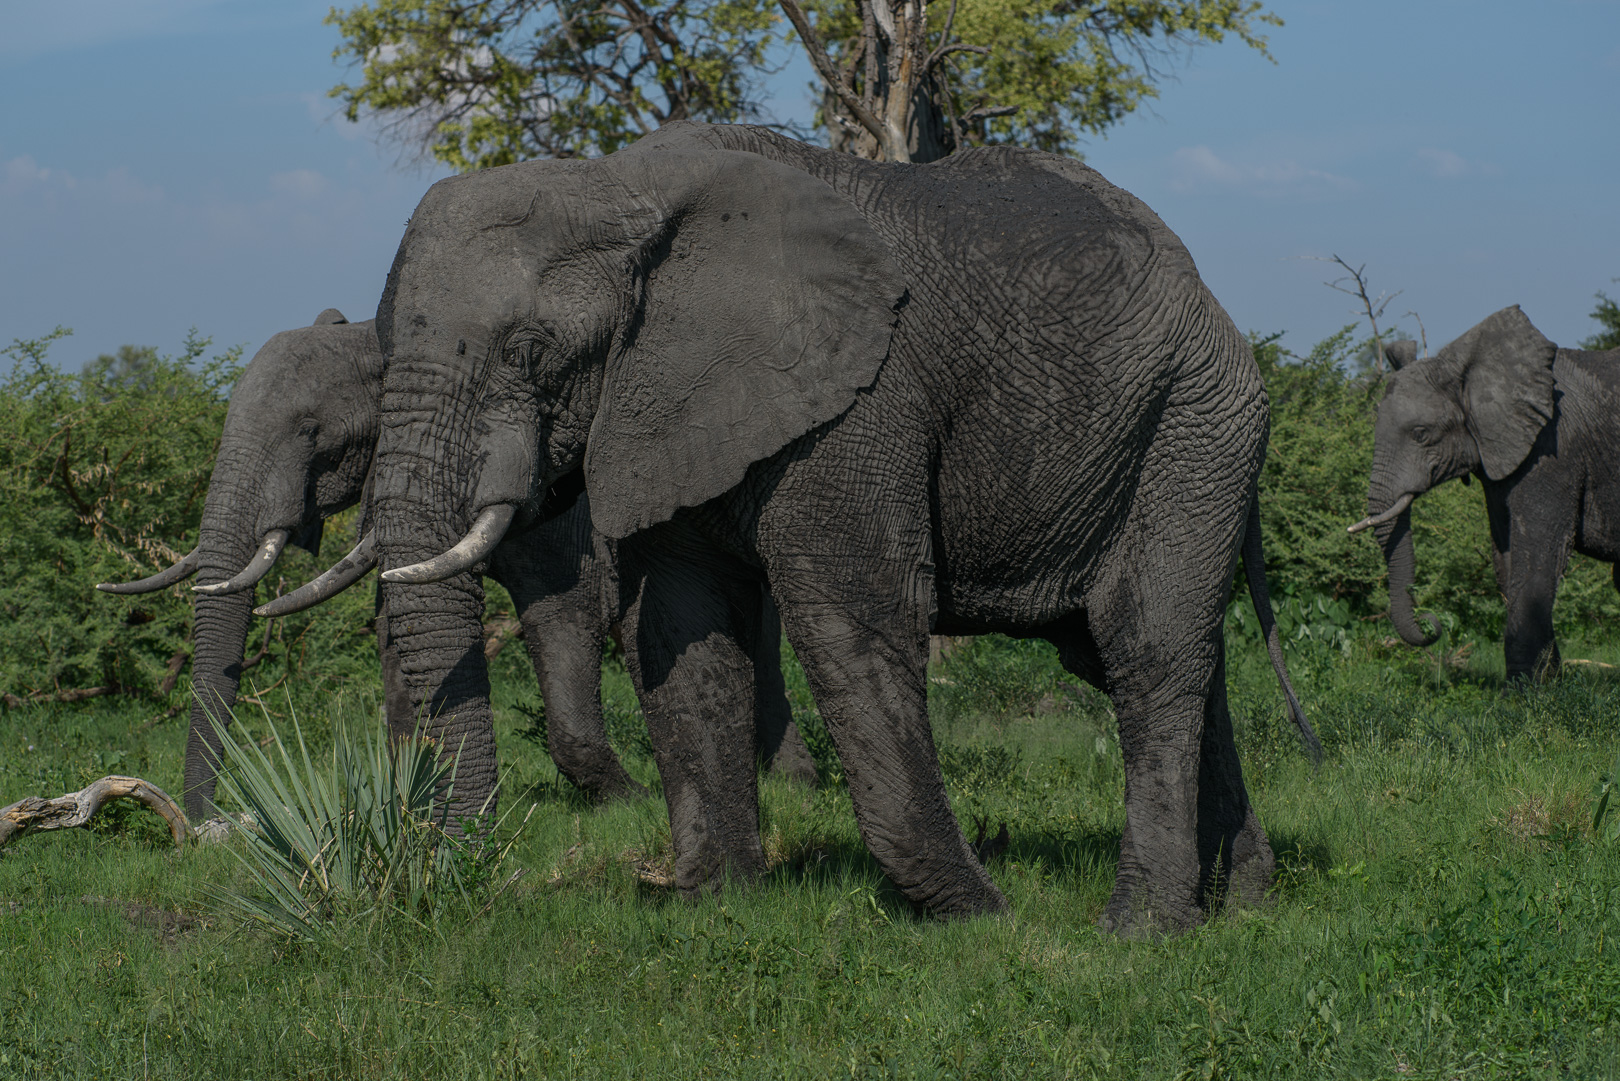 There are many elephants around the camp